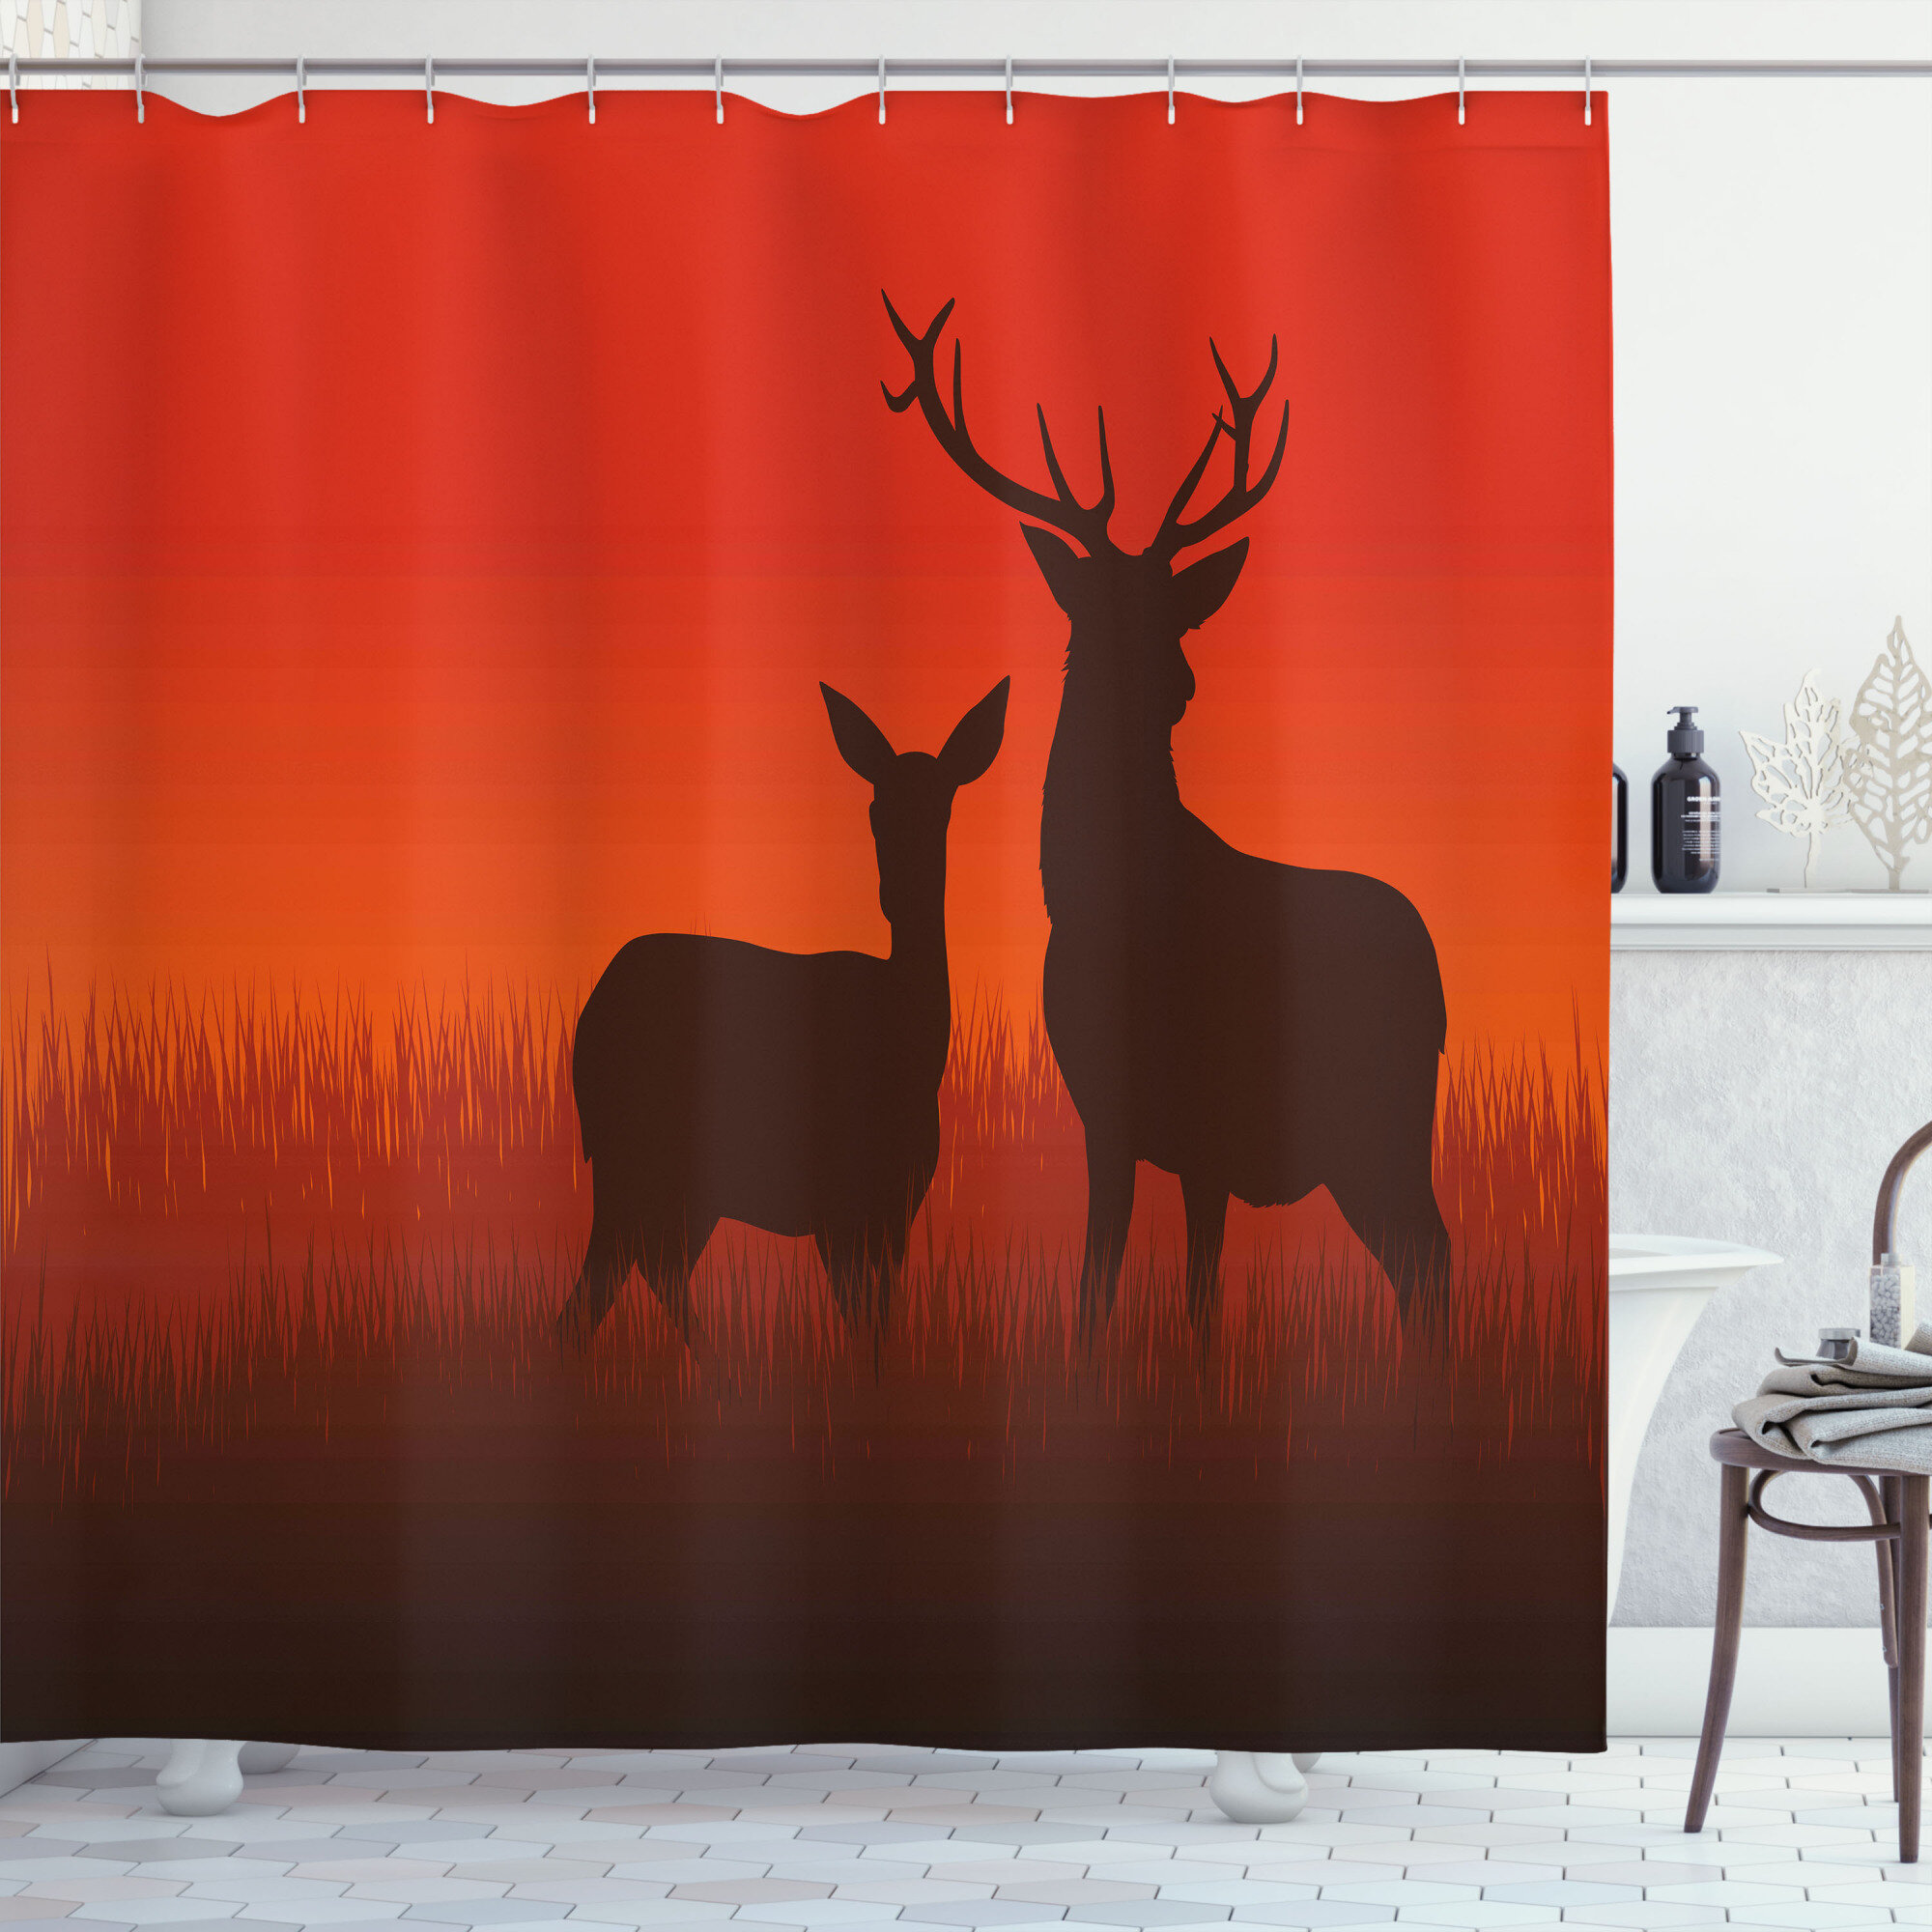 Hunting Shower Curtain Set + Hooks East Urban Home Size: 84 H x 69 W